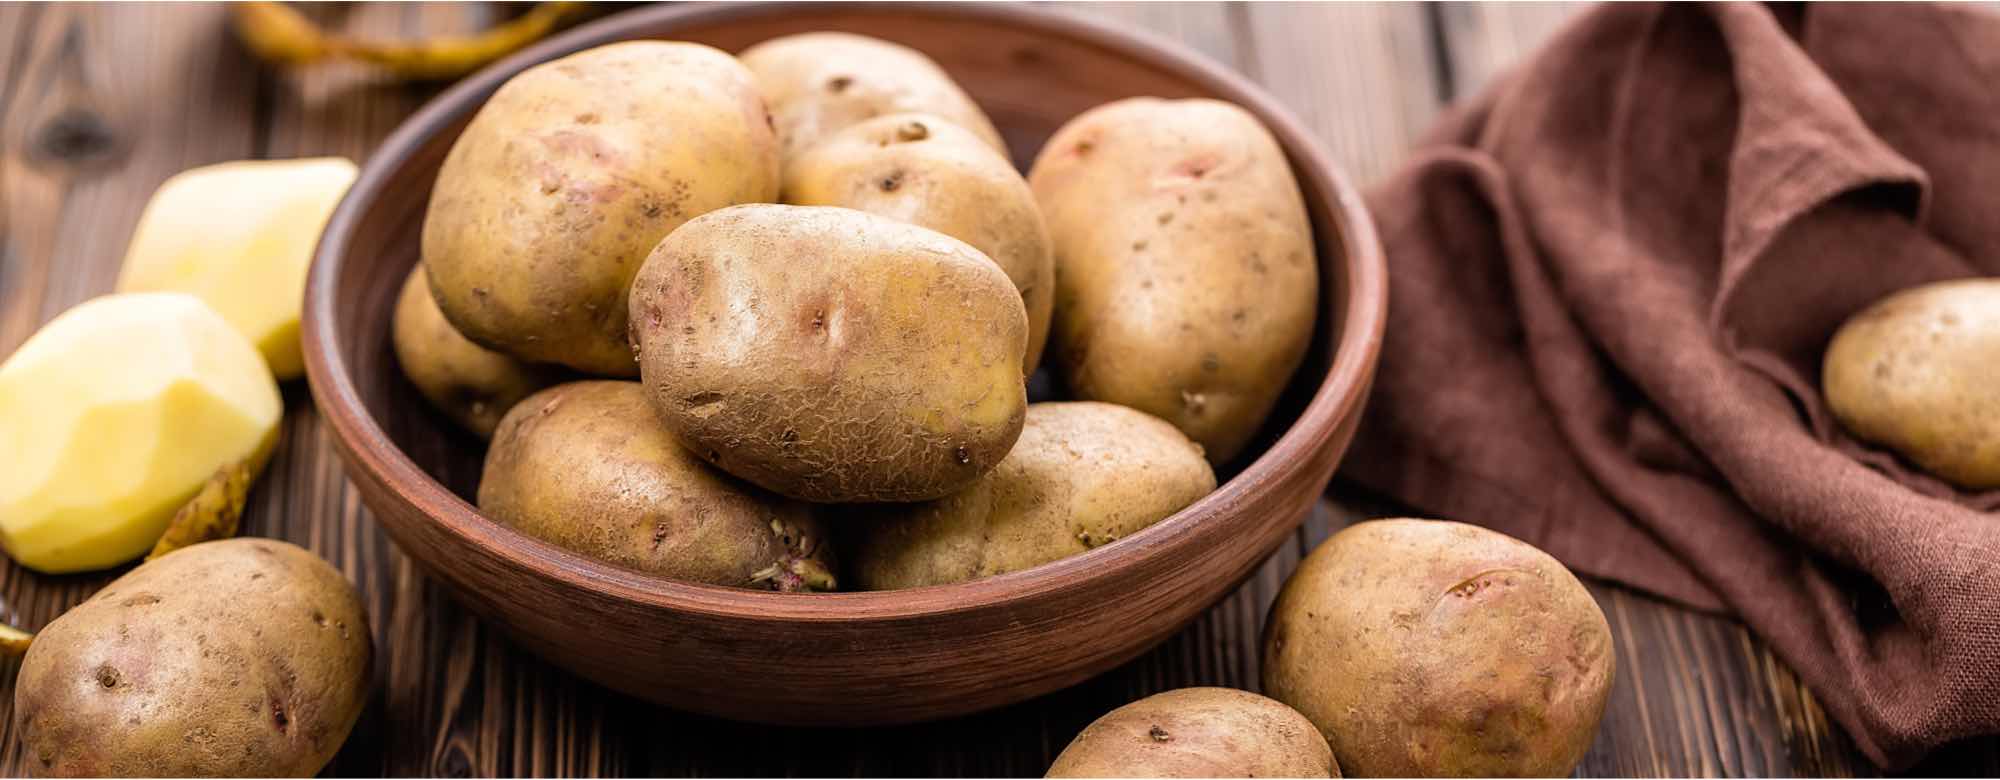 Image of raw potatoes in a bowl